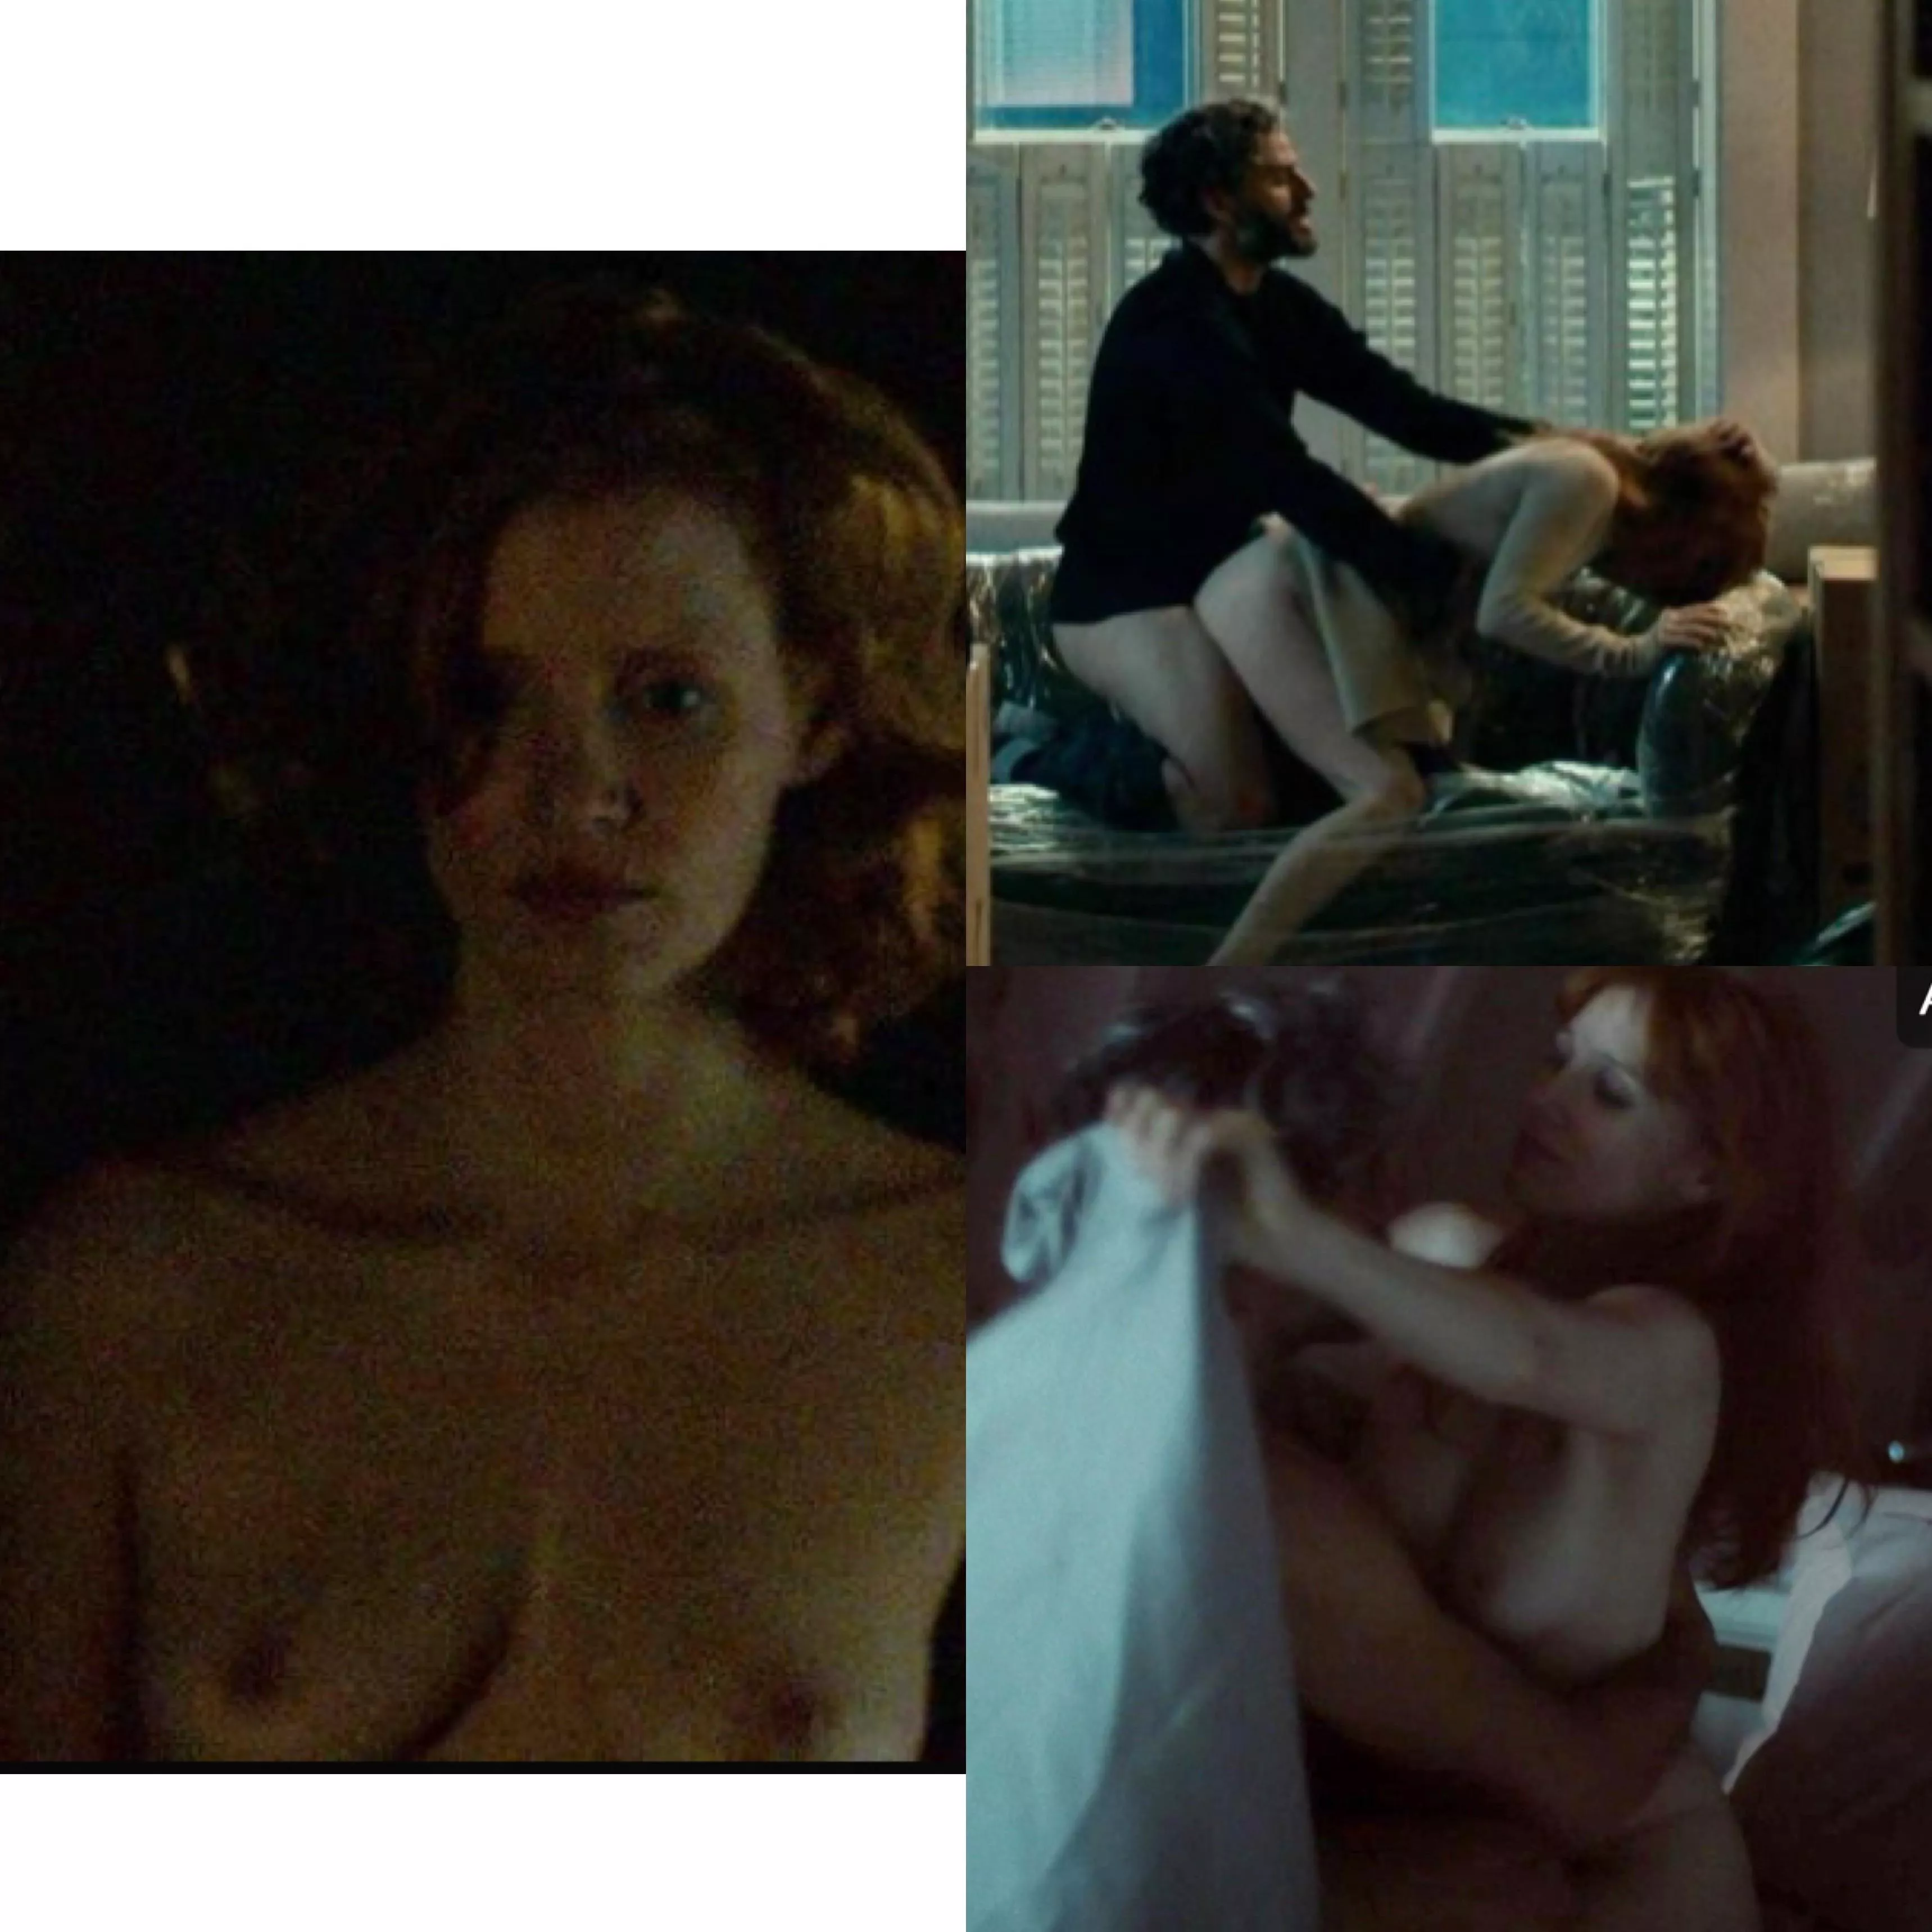 Free Jessica Chastain, Nude Videos